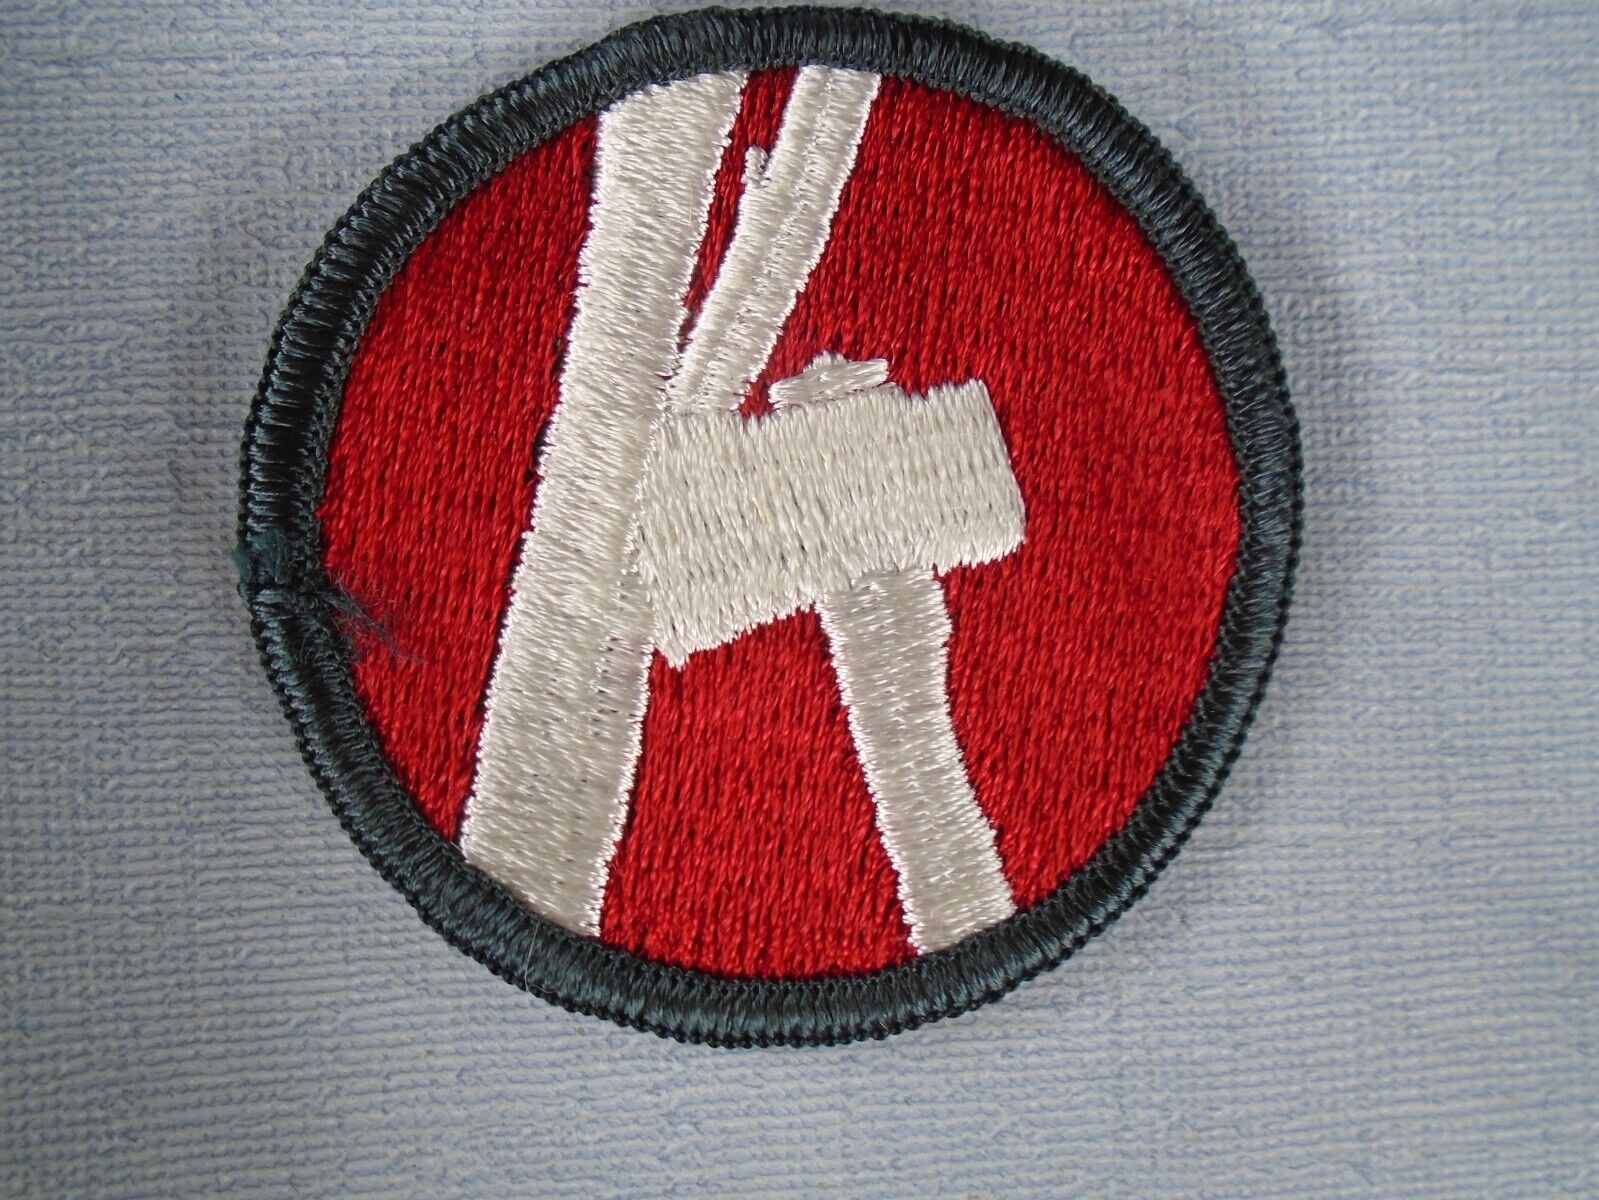 US 84th Infantry Division patch